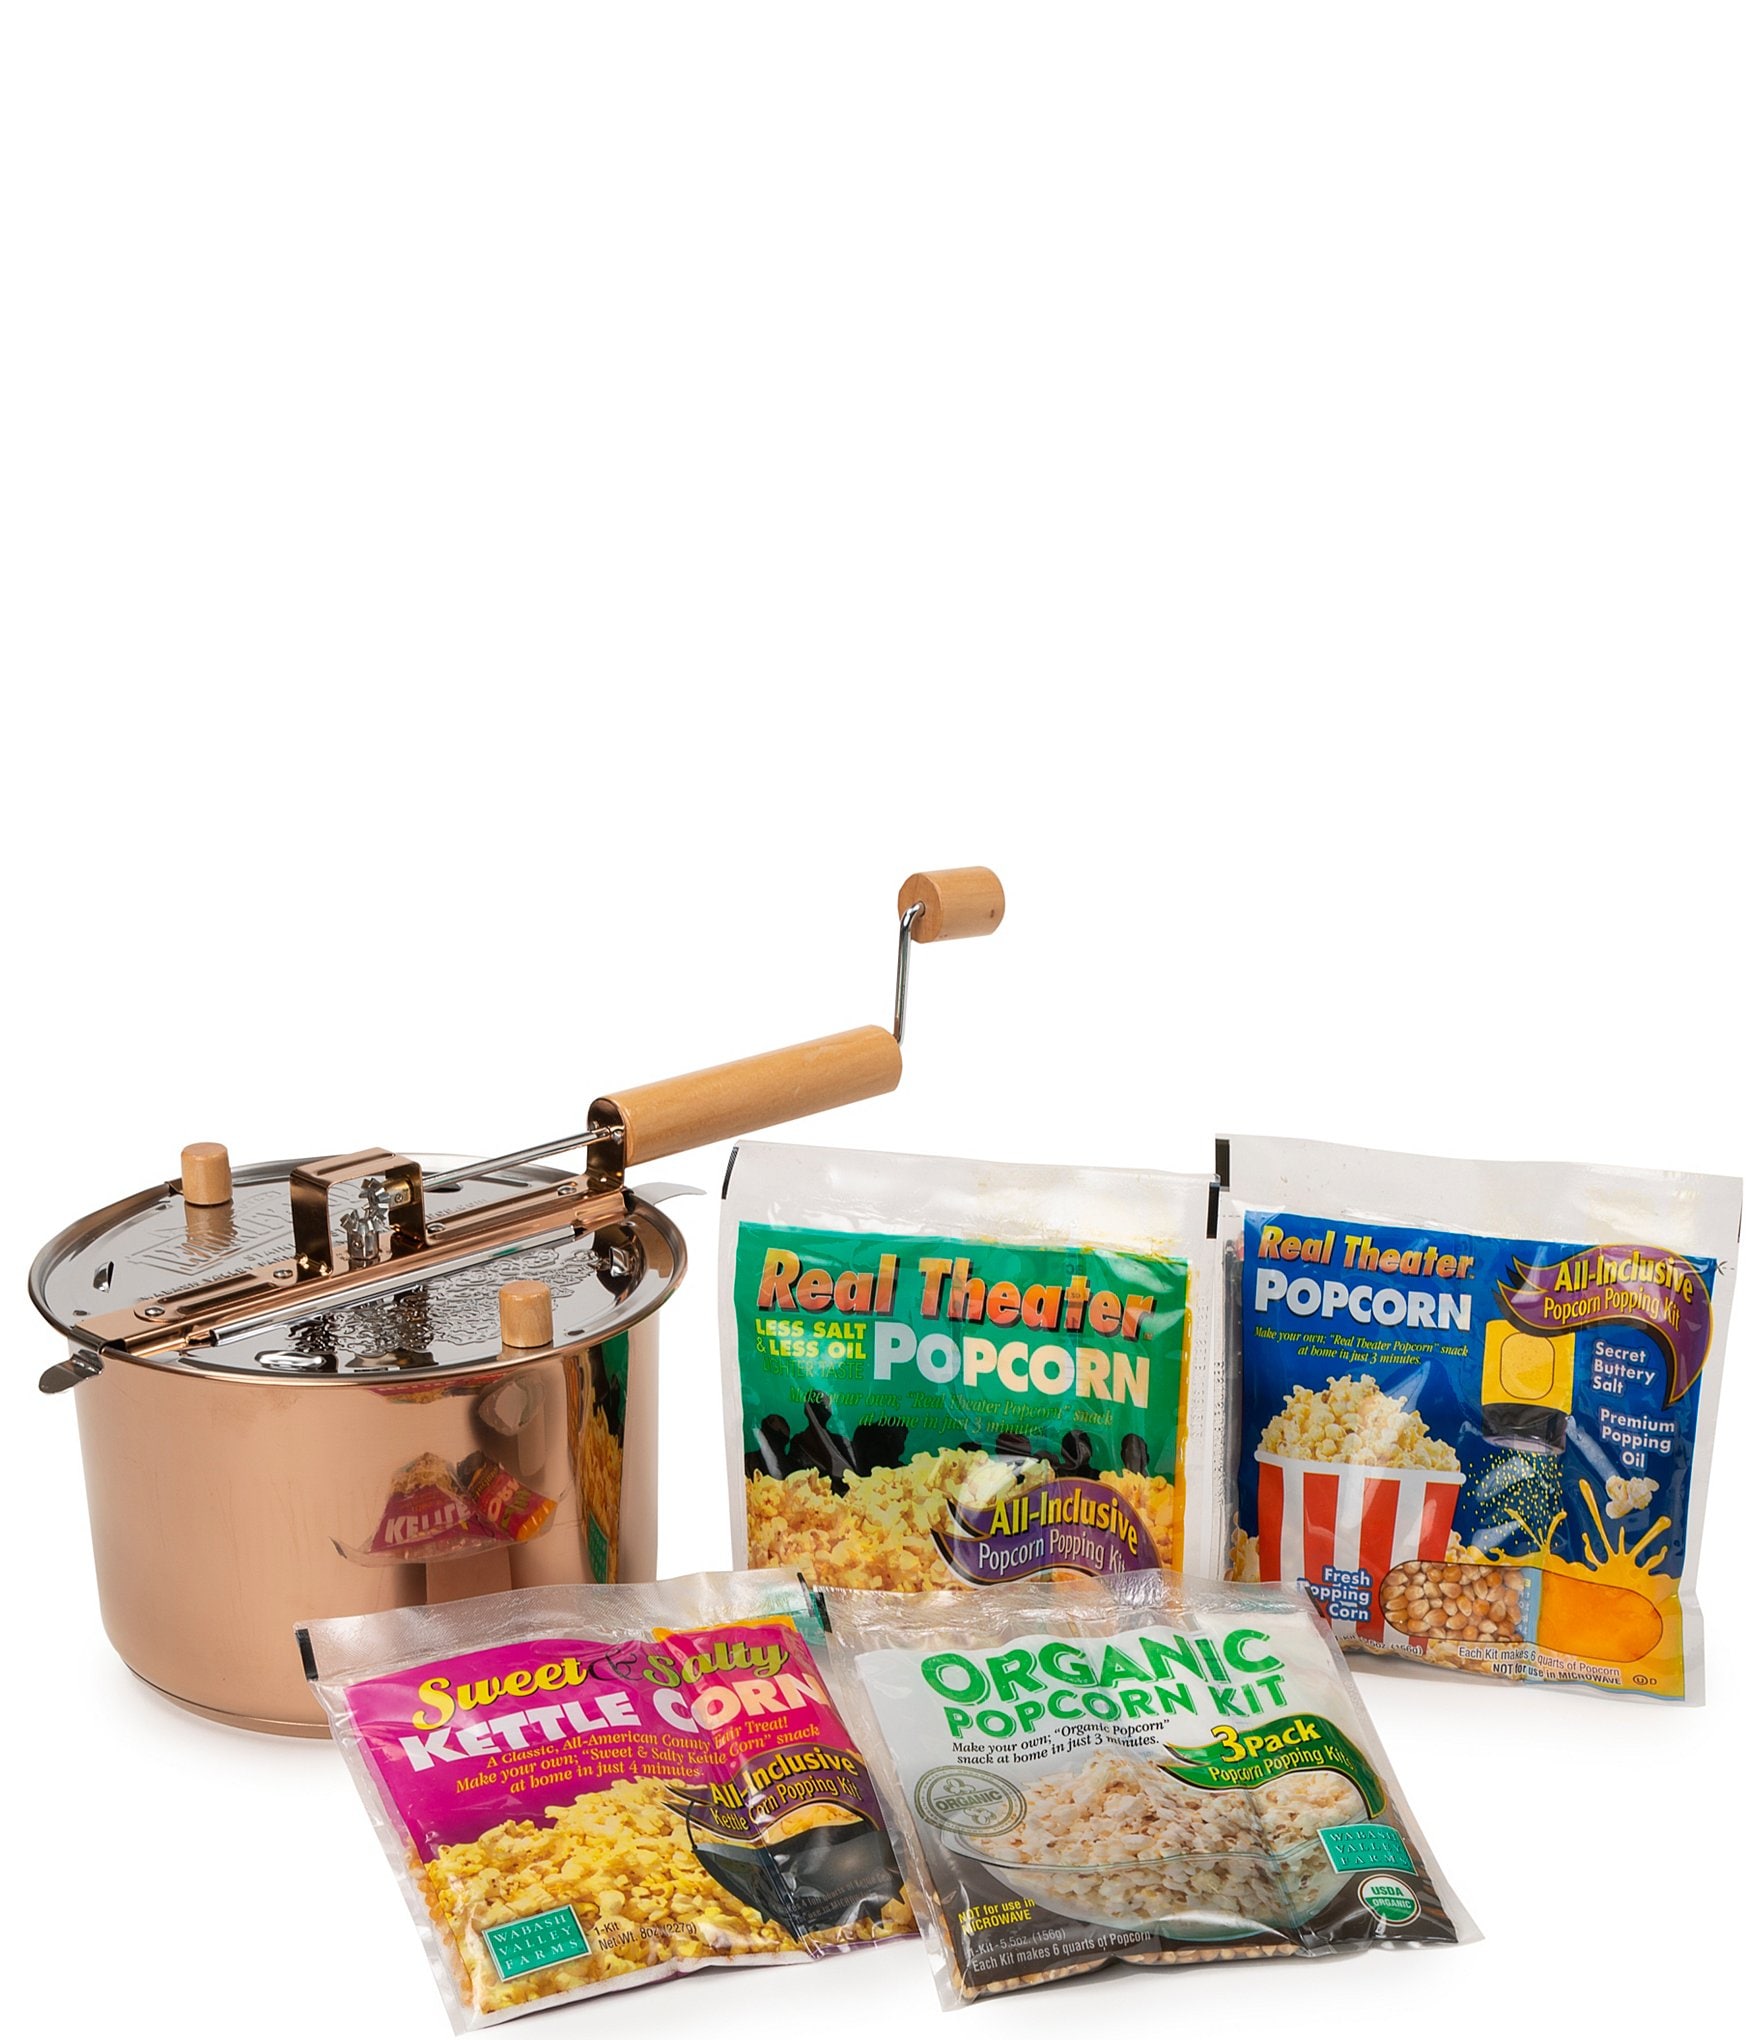 Wabash Valley Farms Copper-Plated Stainless Steel Whirley-Pop Popcorn Popper